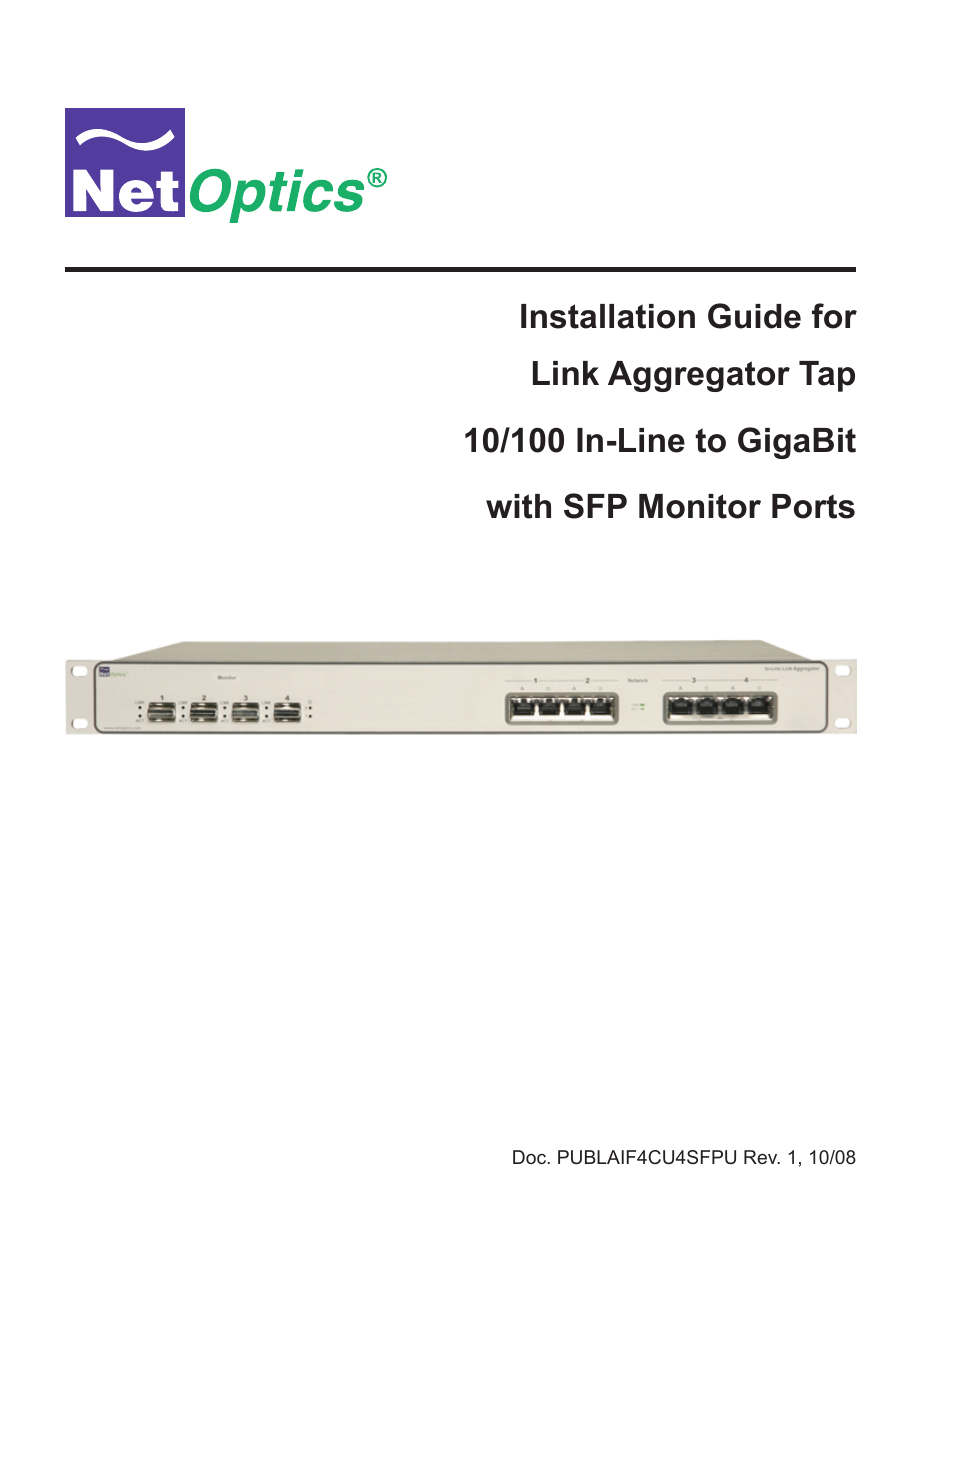 Link Aggregator Tap 10/100 In-Line to GigaBit with SFP Monitor Ports